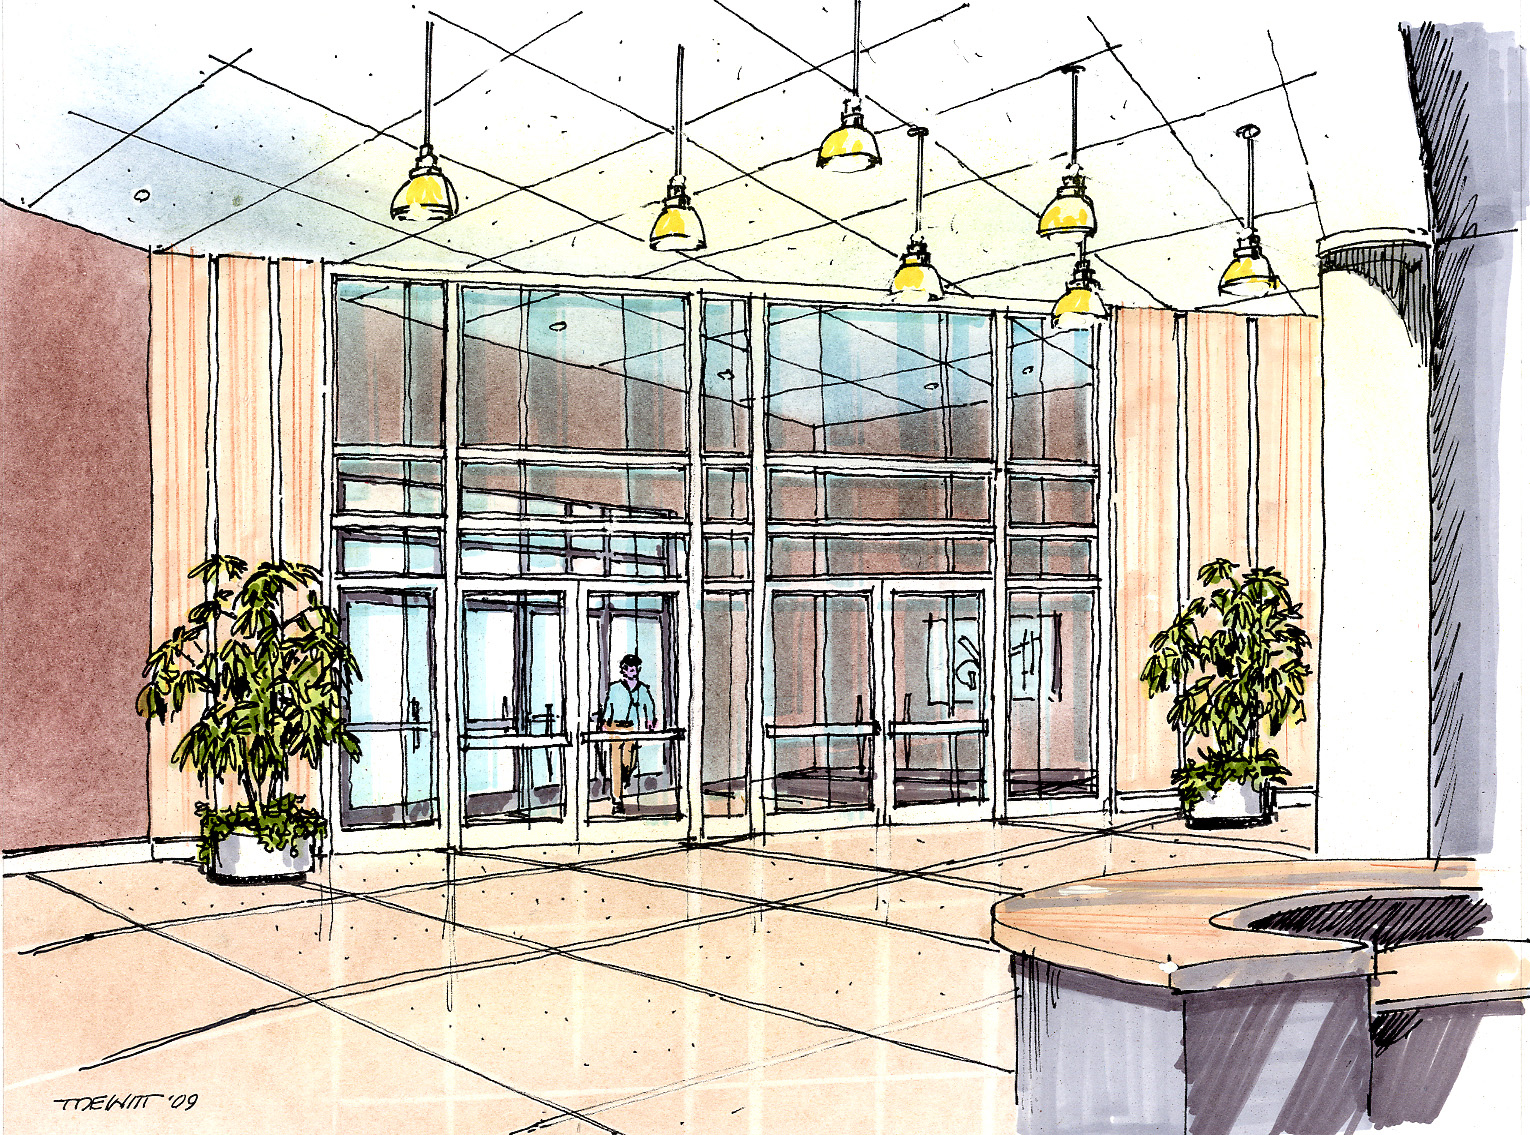 Architectural drawing of a lobby interior